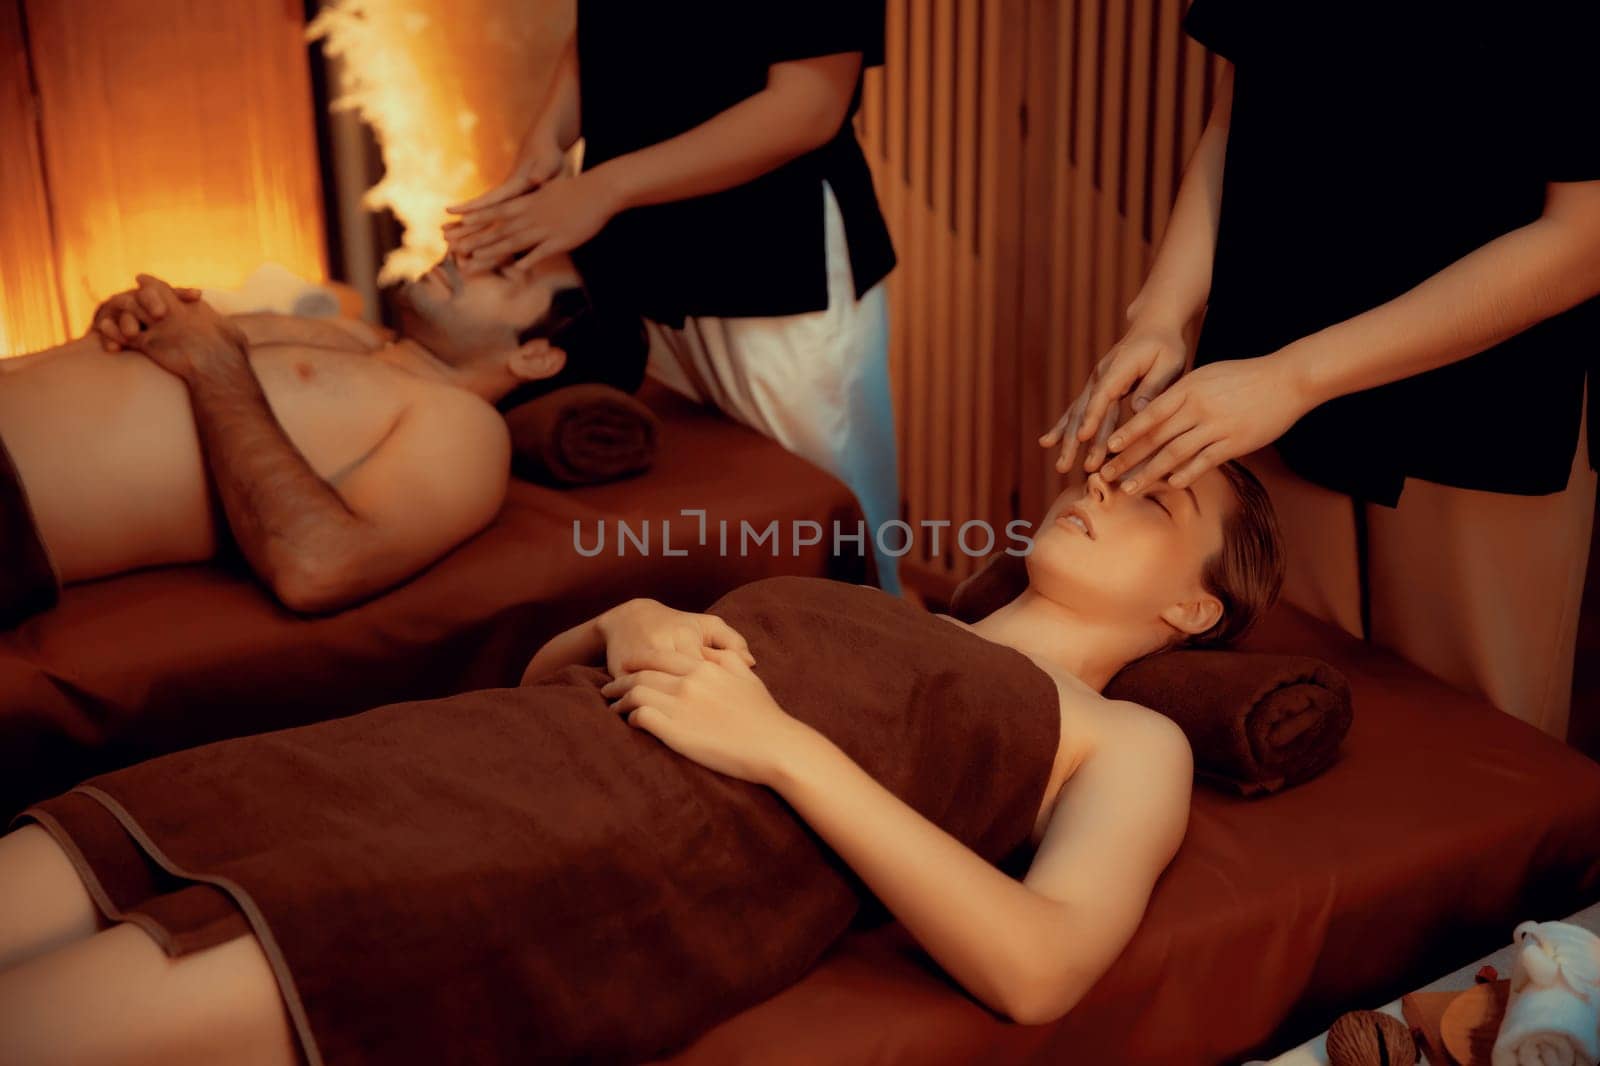 Couple customer enjoying relaxing anti-stress head massage and pampering facial beauty skin recreation leisure in warm candle lighting ambient salon spa in luxury resort or hotel. Quiescent